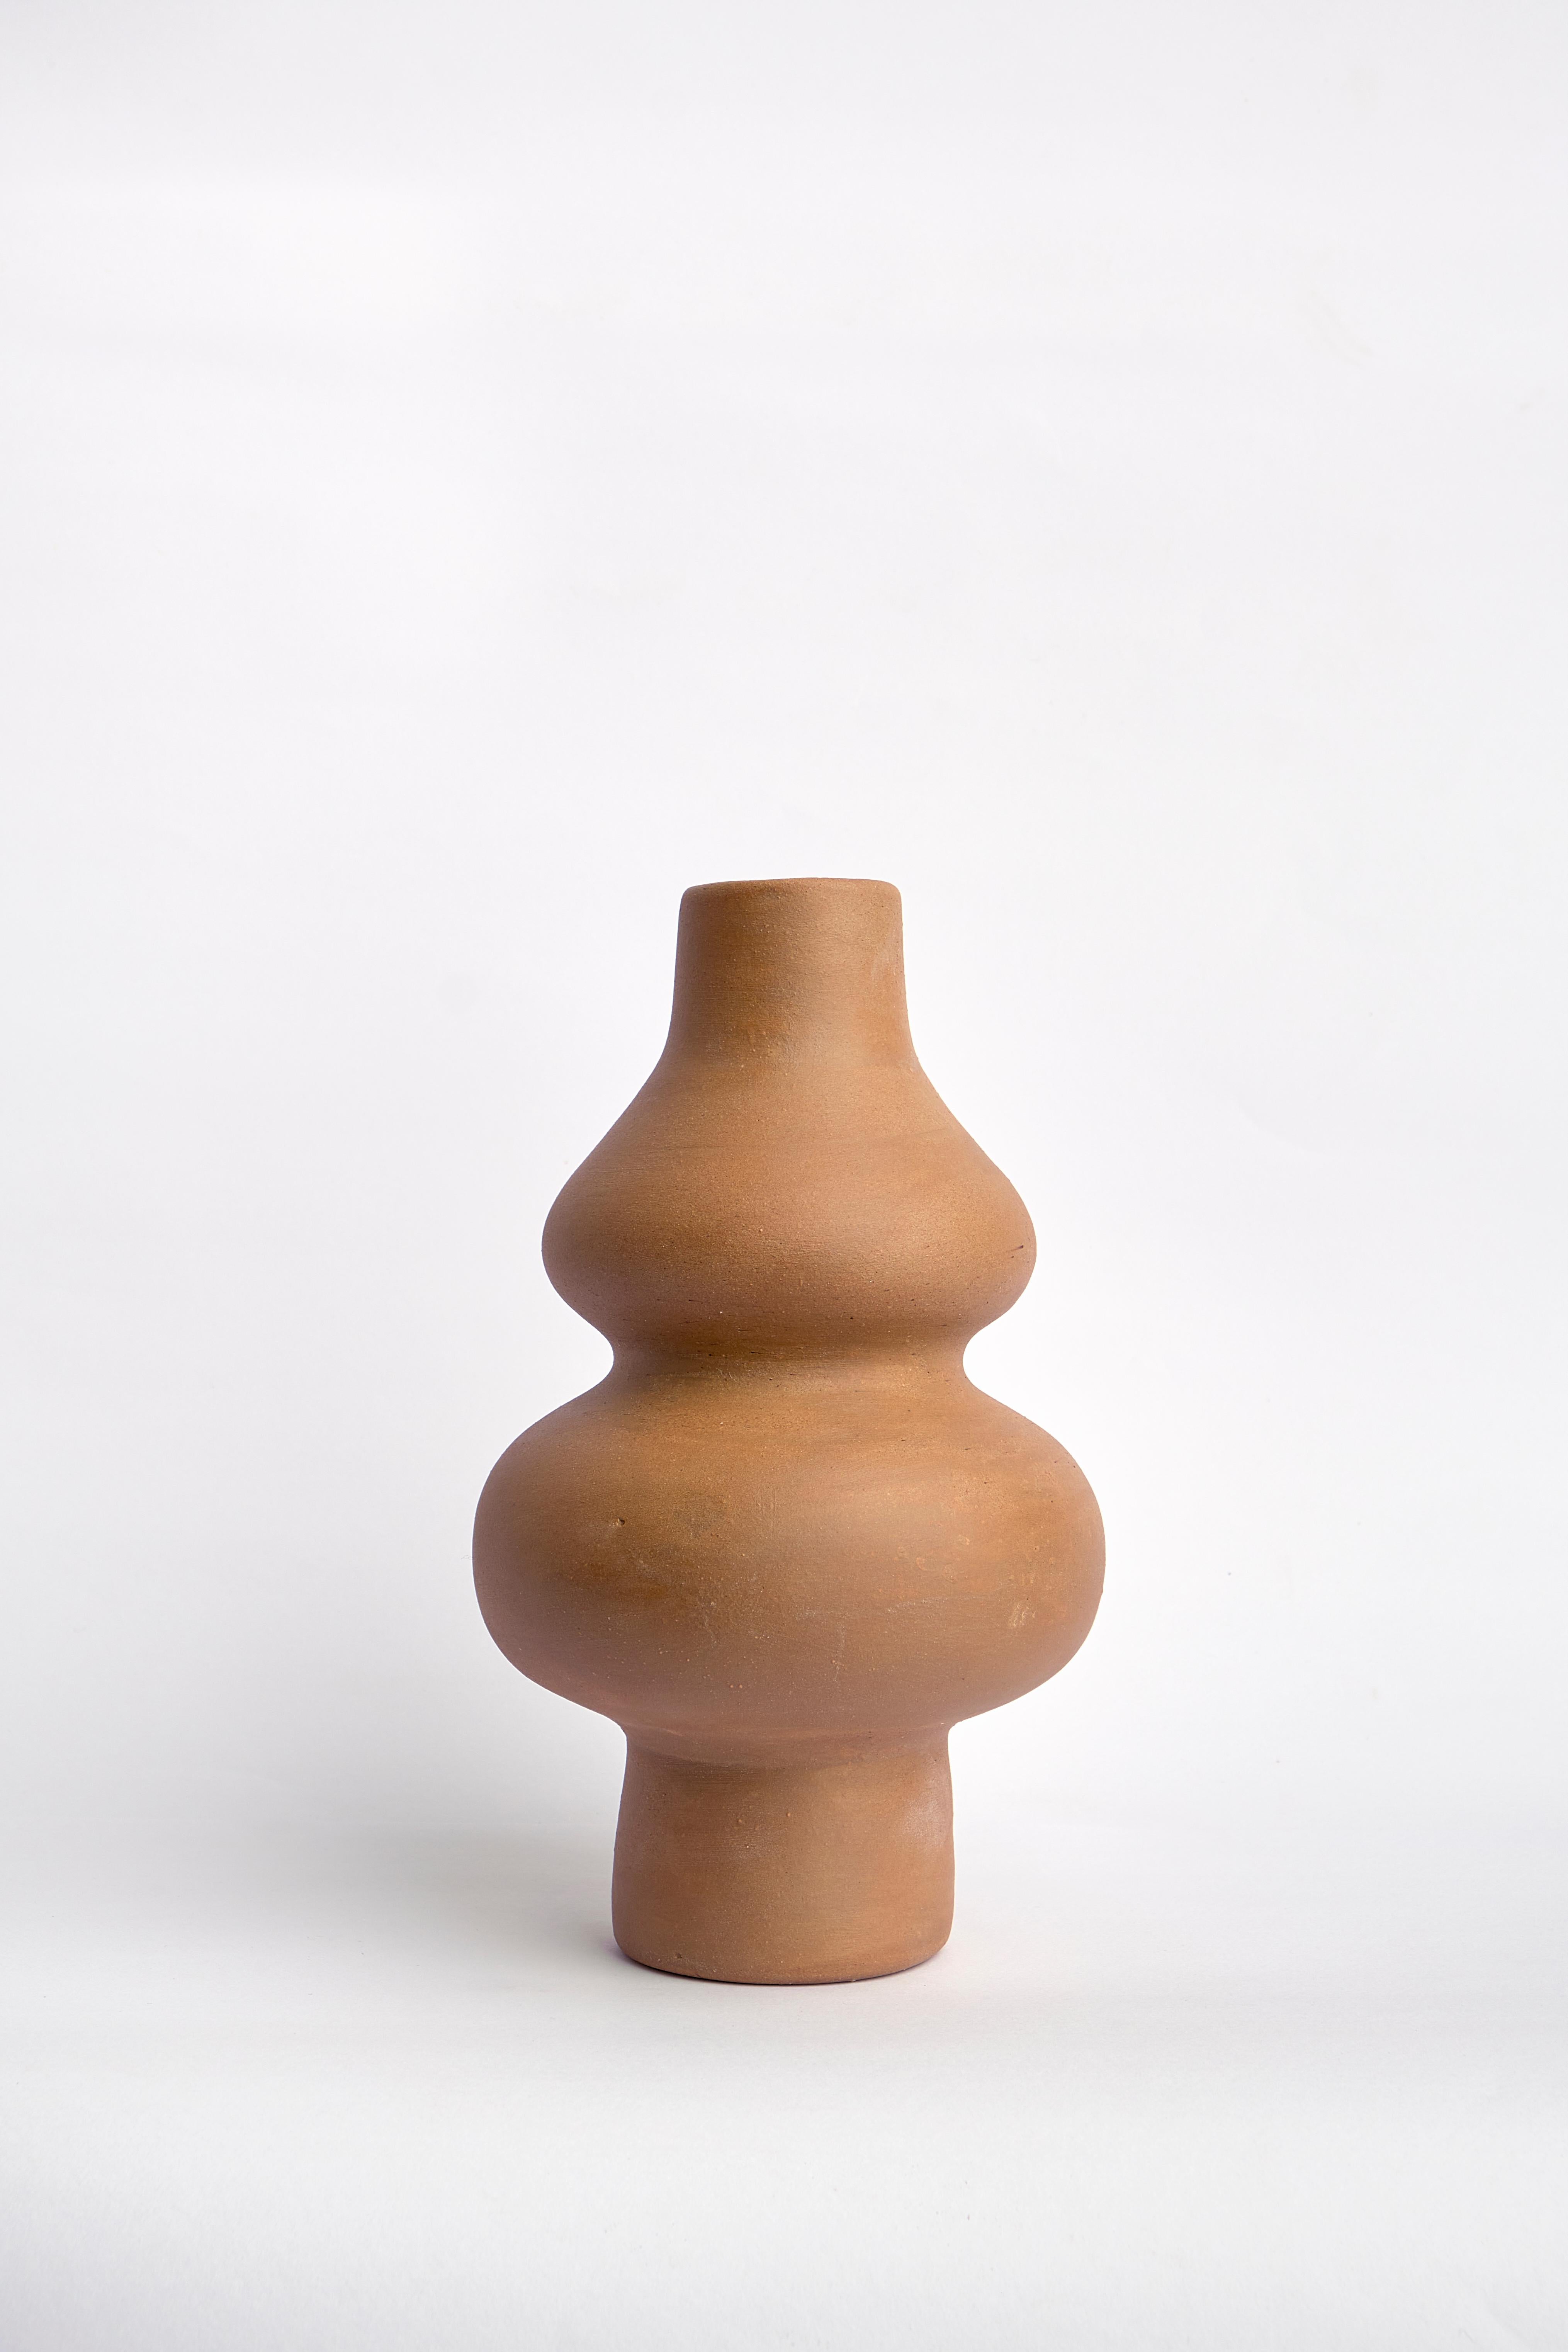 Femme I vase by Camila Apaez
Materials: Ceramic
Dimensions: ? 13 x H 20 cm
Options: White Bone, Chocolate, Charcoal black, Natural, Barro tostado.

Additional pictures are just references for other color possibilities: White bone, Chocolate,